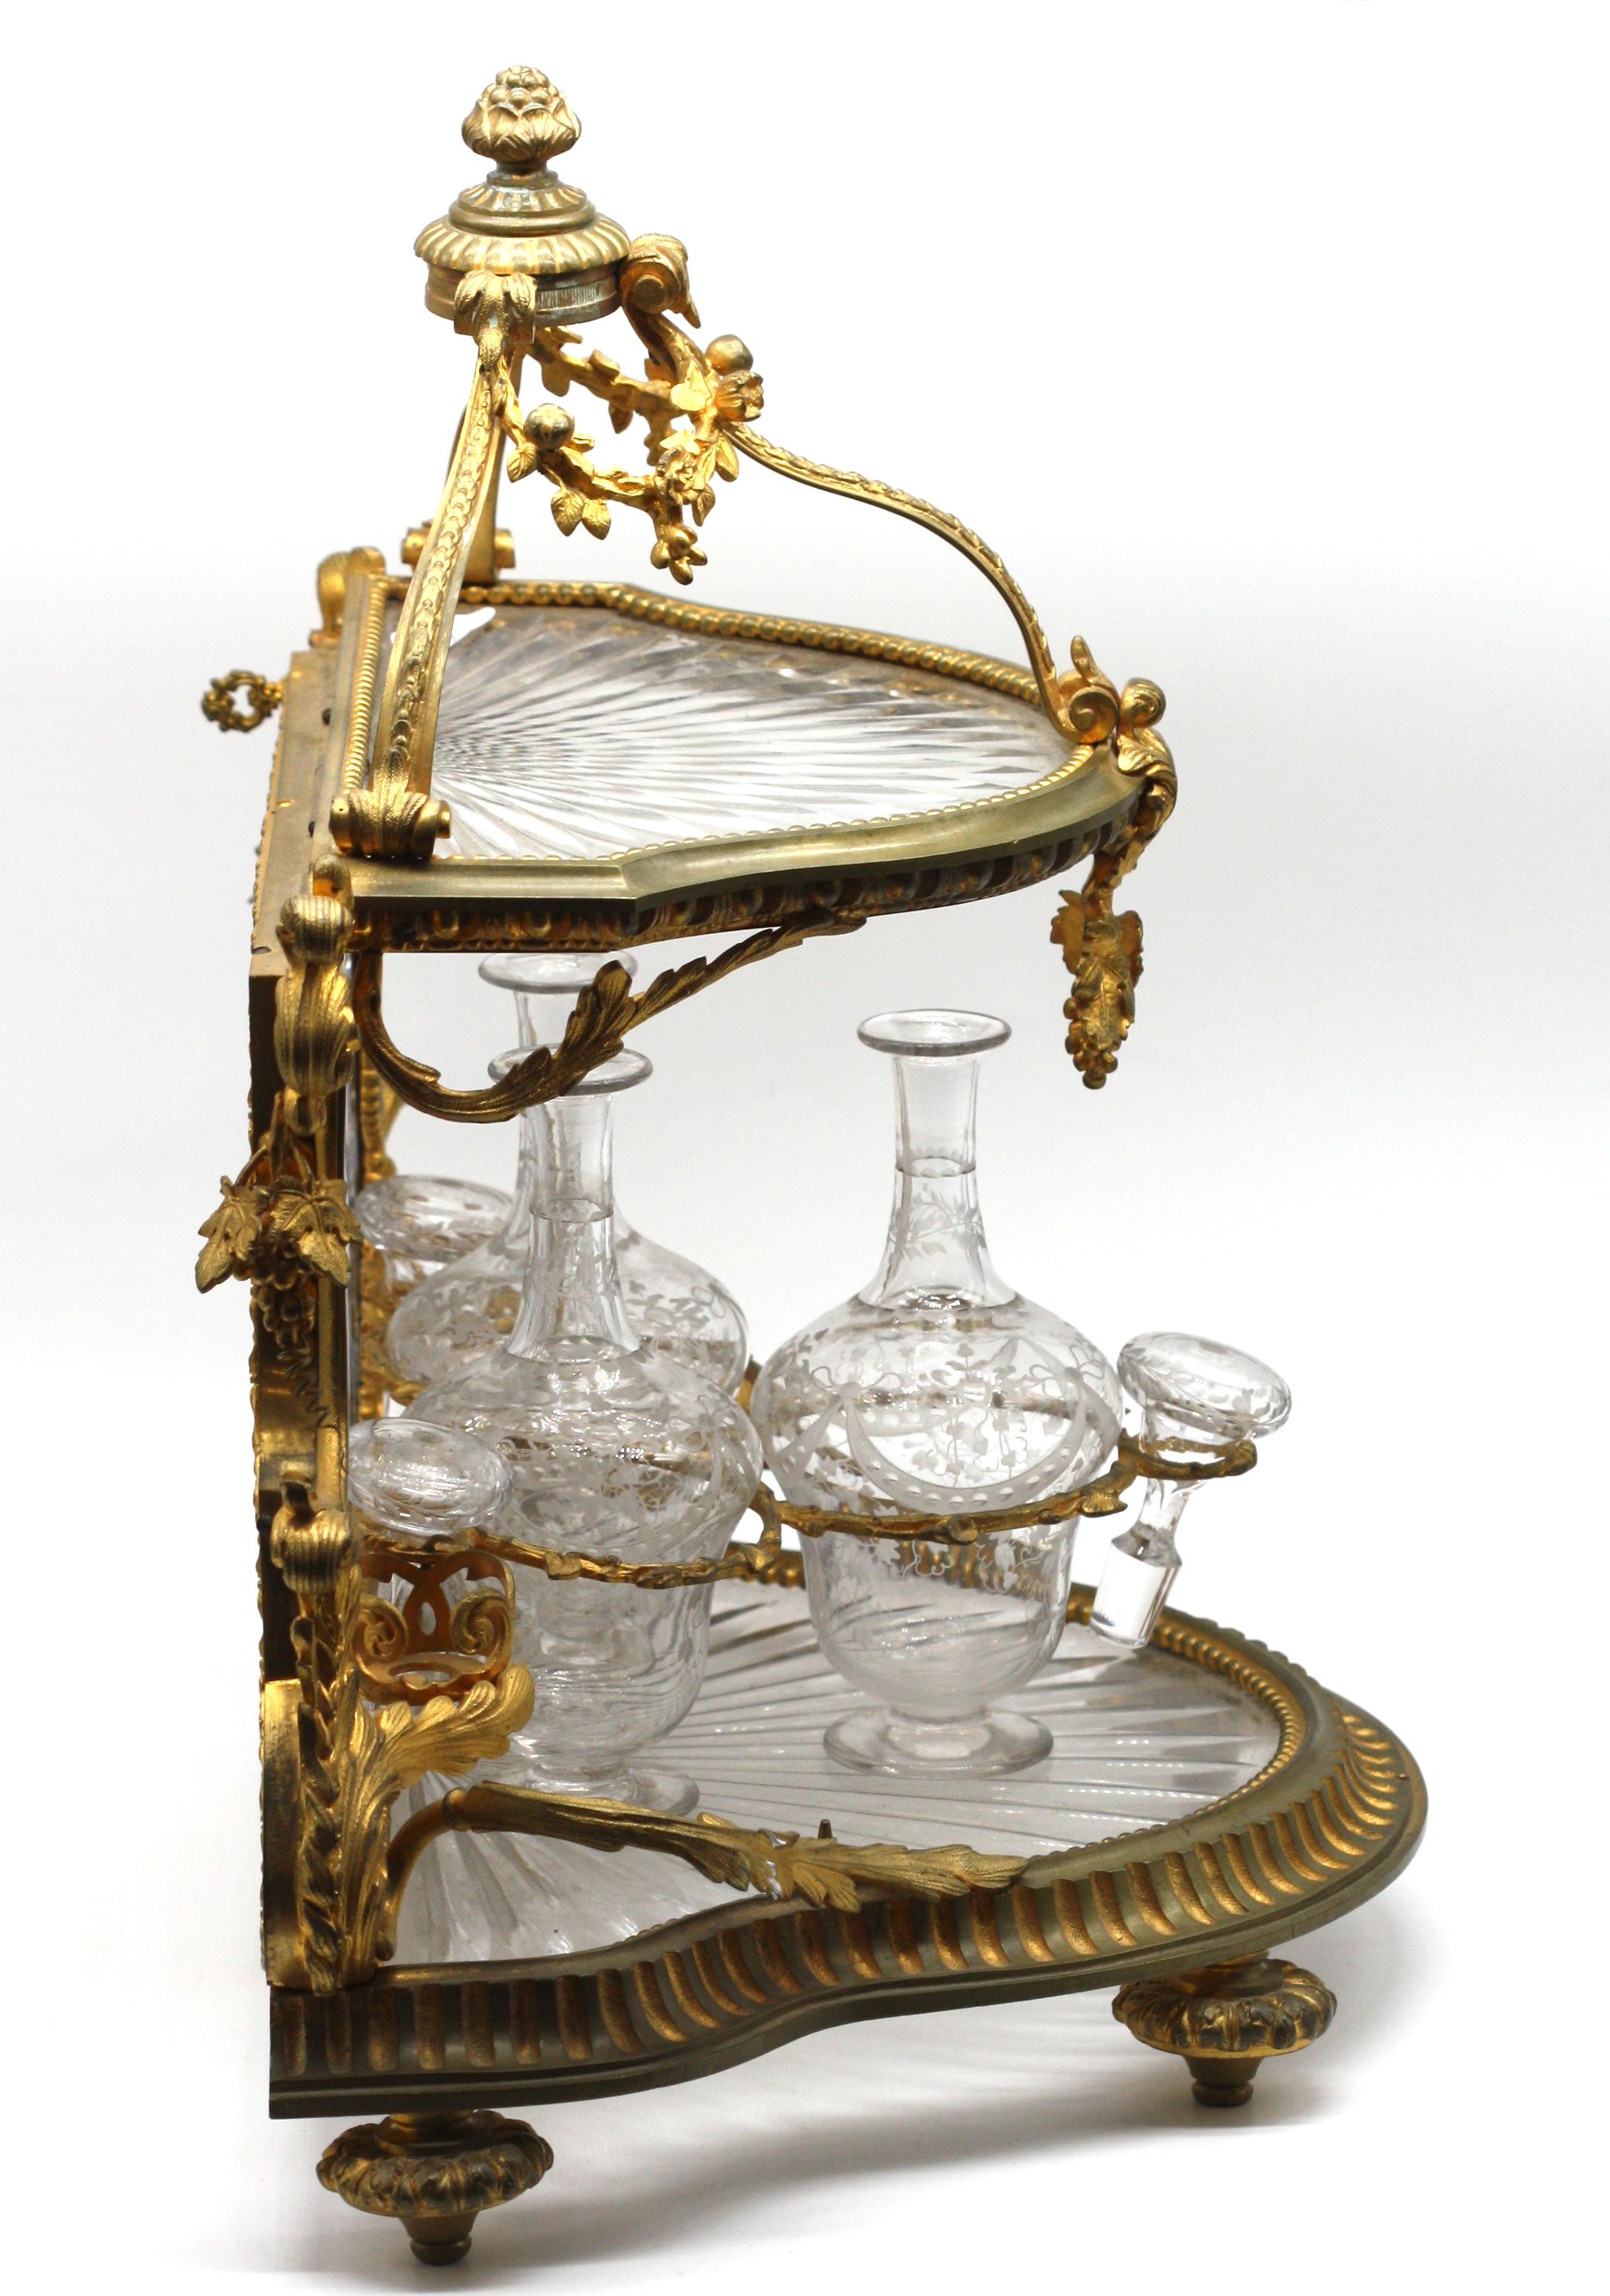 20th Century French Gilt Bronze and Cut-Glass Tiered Liquor 'Tantalus' Set For Sale